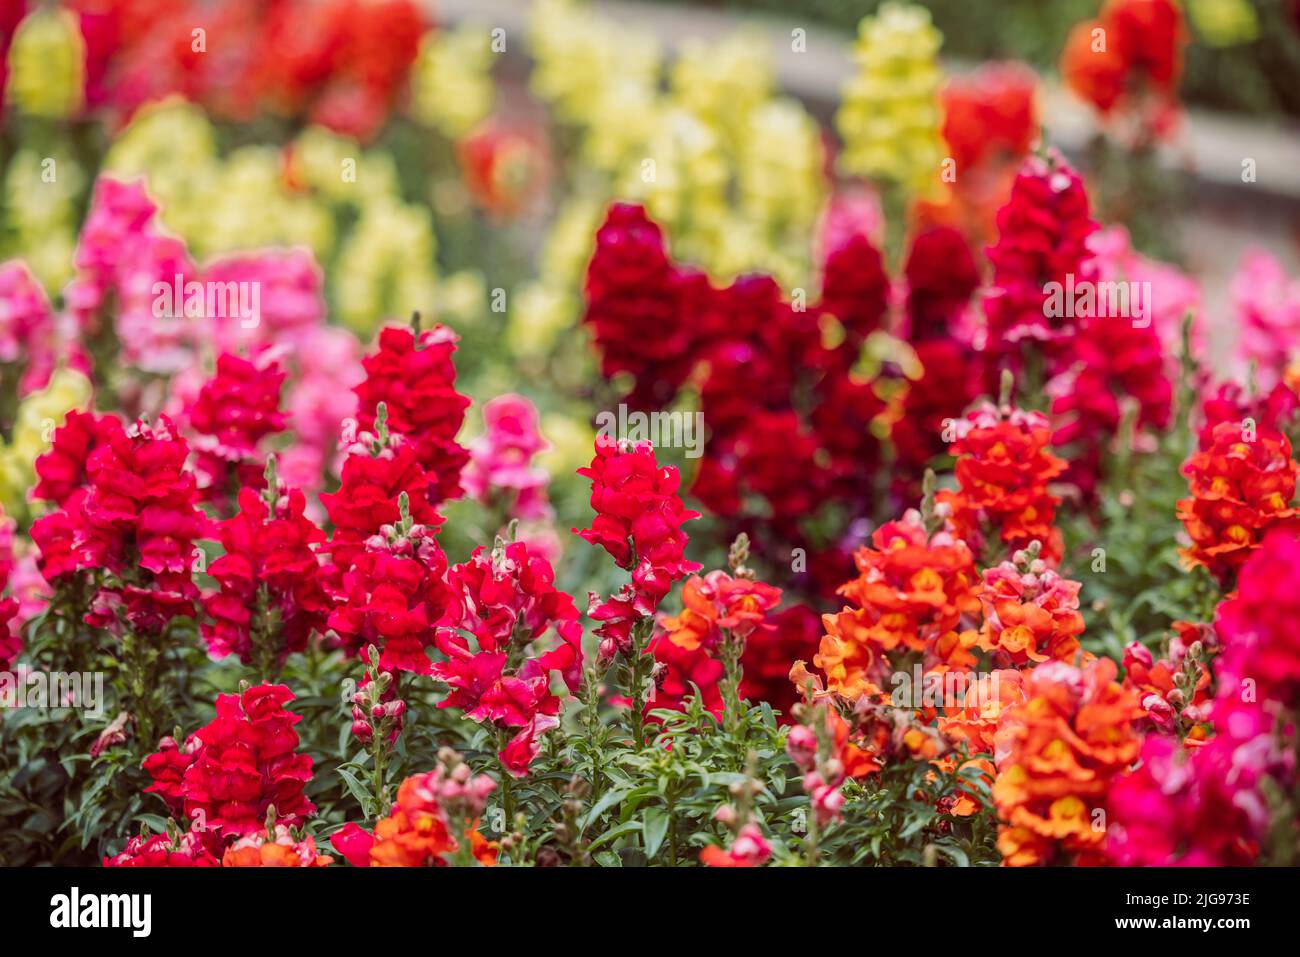 A large and colorful garden of trailing candy showers snapdragons in bloom in the spring. Stock Photo